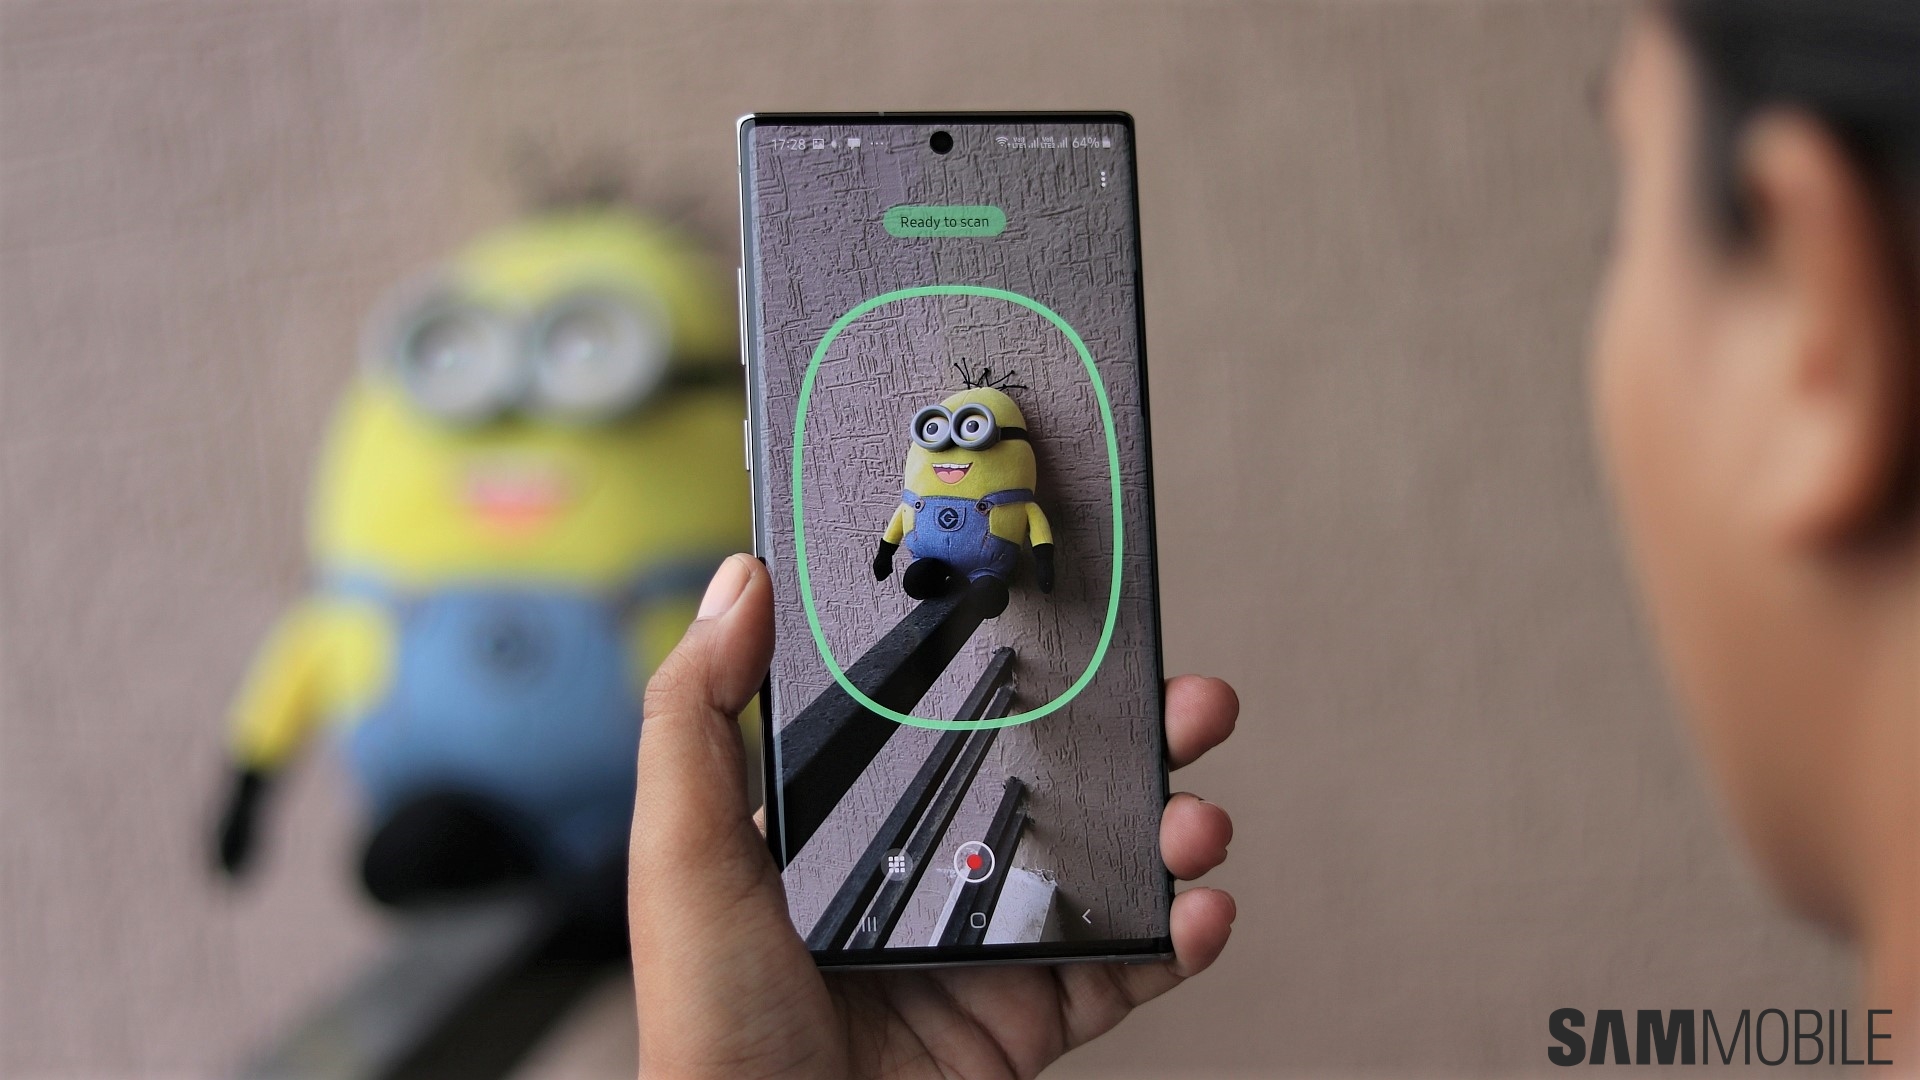 Galaxy Note 10+ 3D scanner app now available the Galaxy Store SamMobile